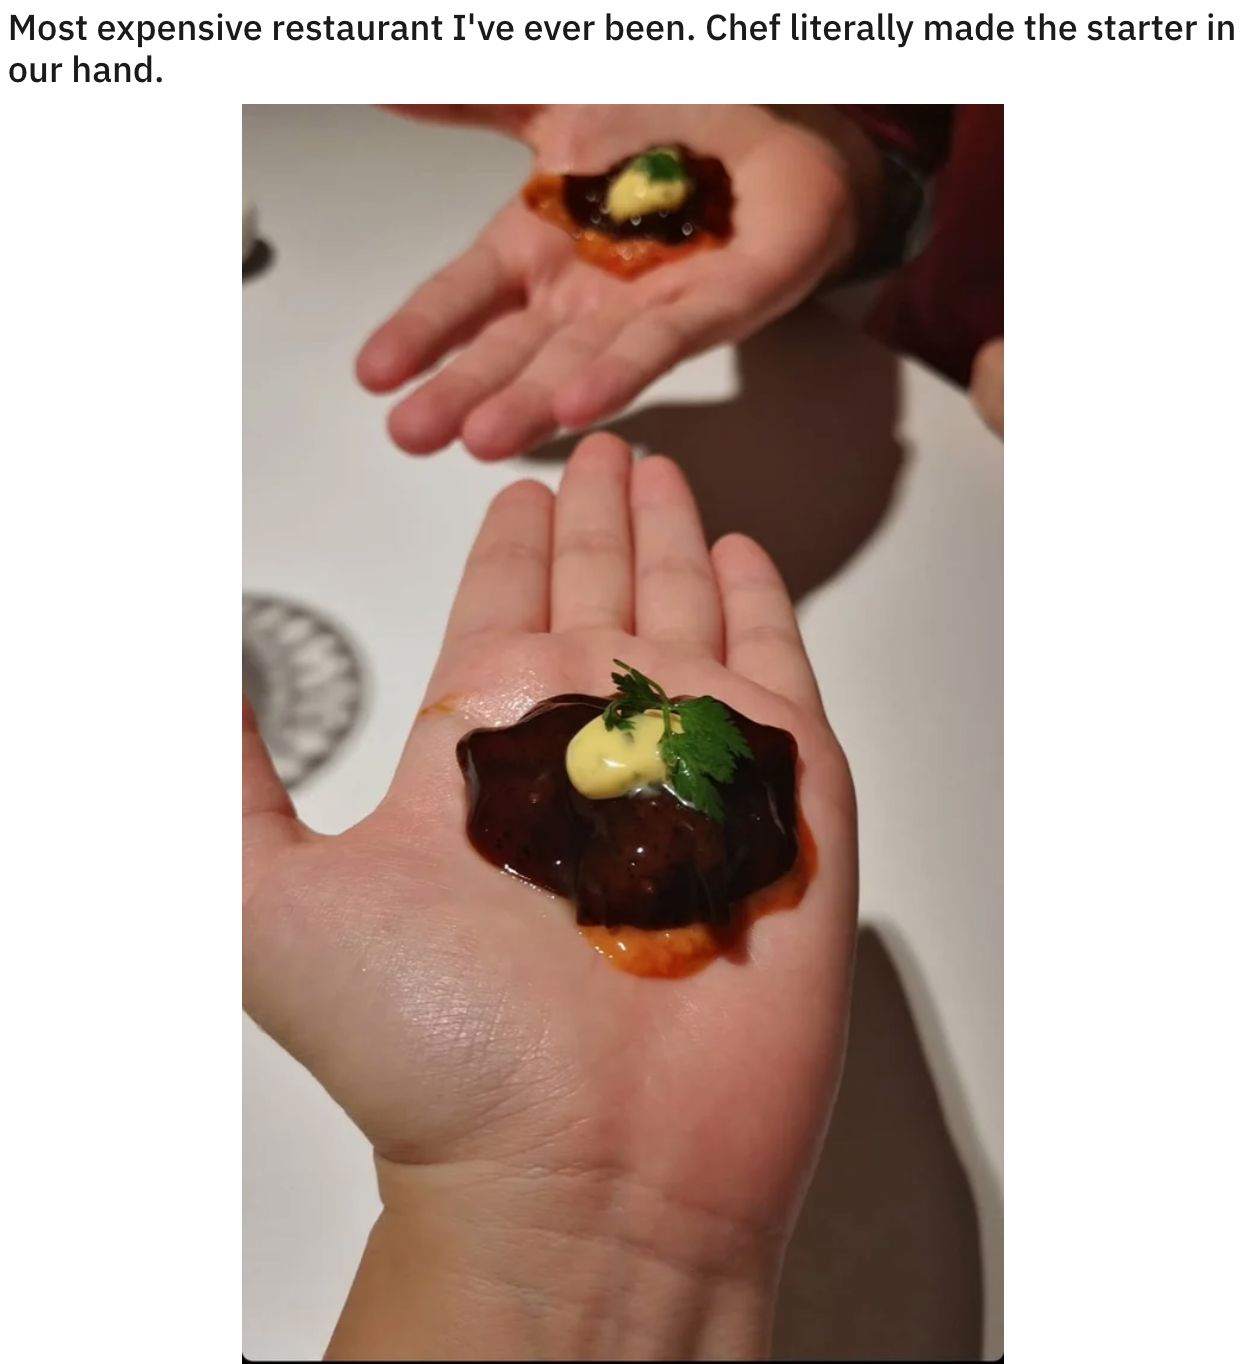 funny food pics -- food served on hand - Most expensive restaurant I've ever been. Chef literally made the starter in our hand.